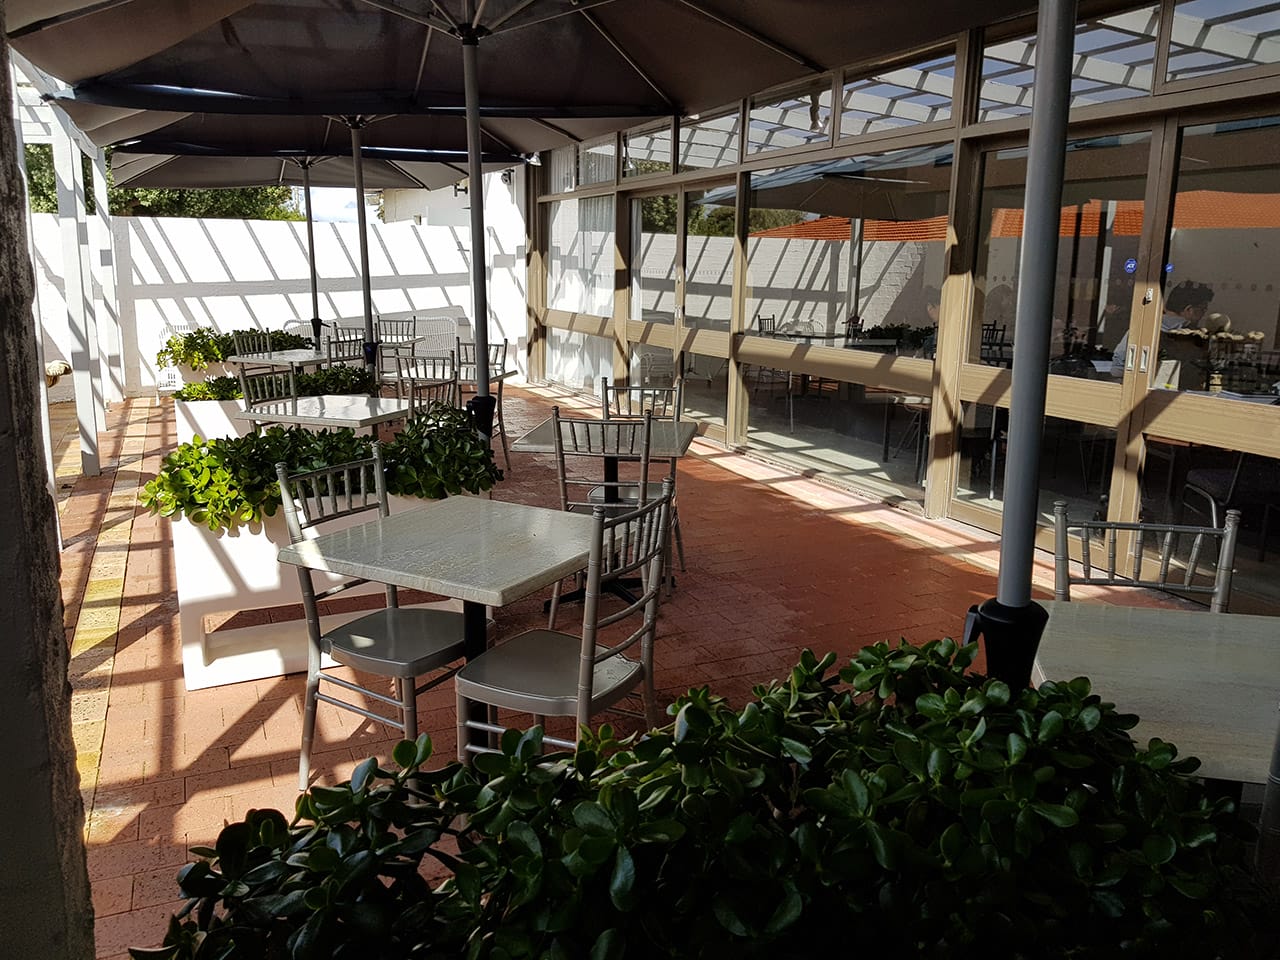 Chairs And Tables In The Alfresco With Green Plants